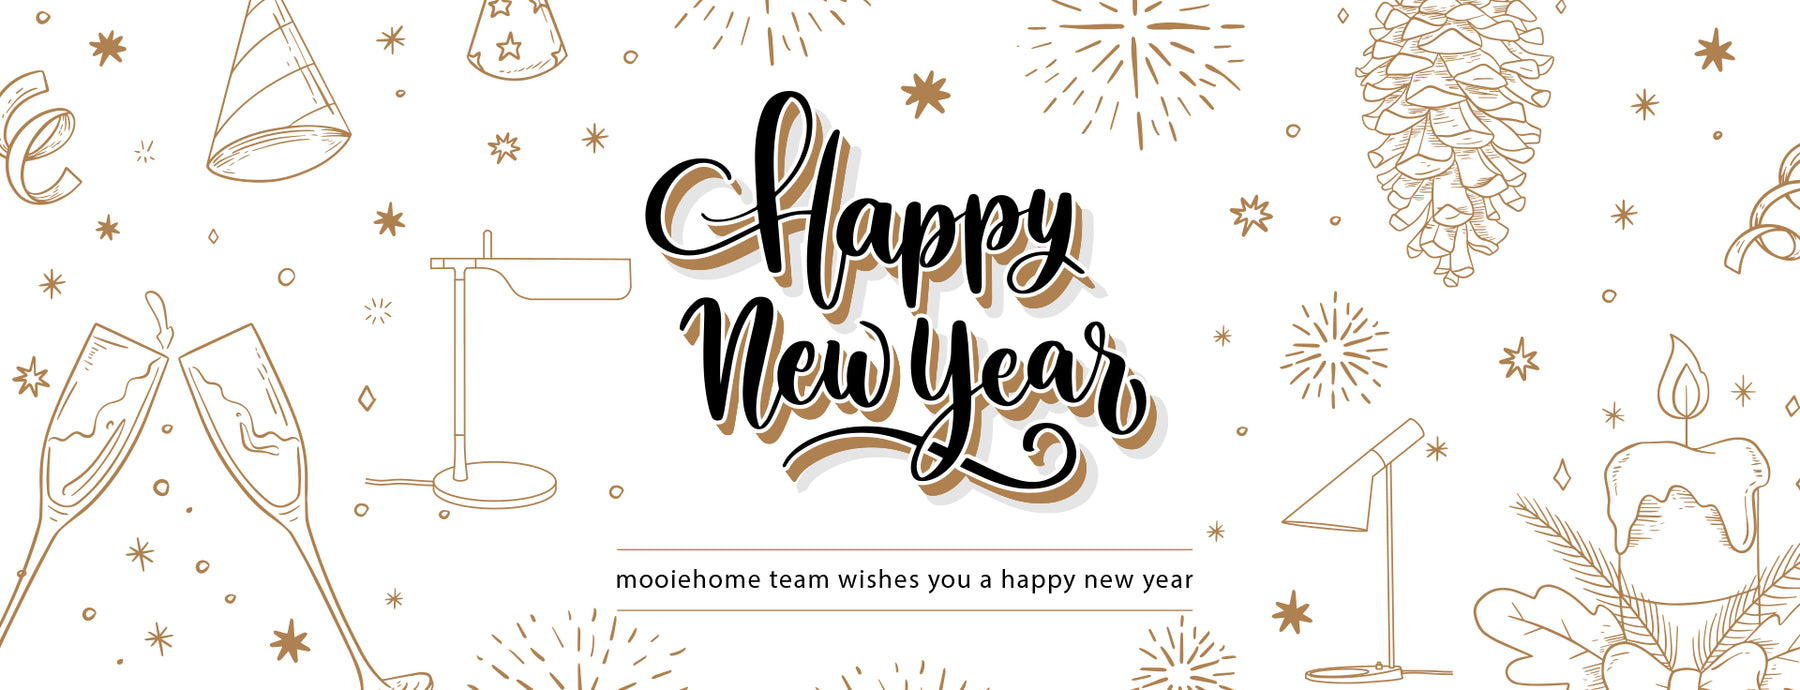 Mooiehome’s New Year’s letter to you, wishing you peace and happiness